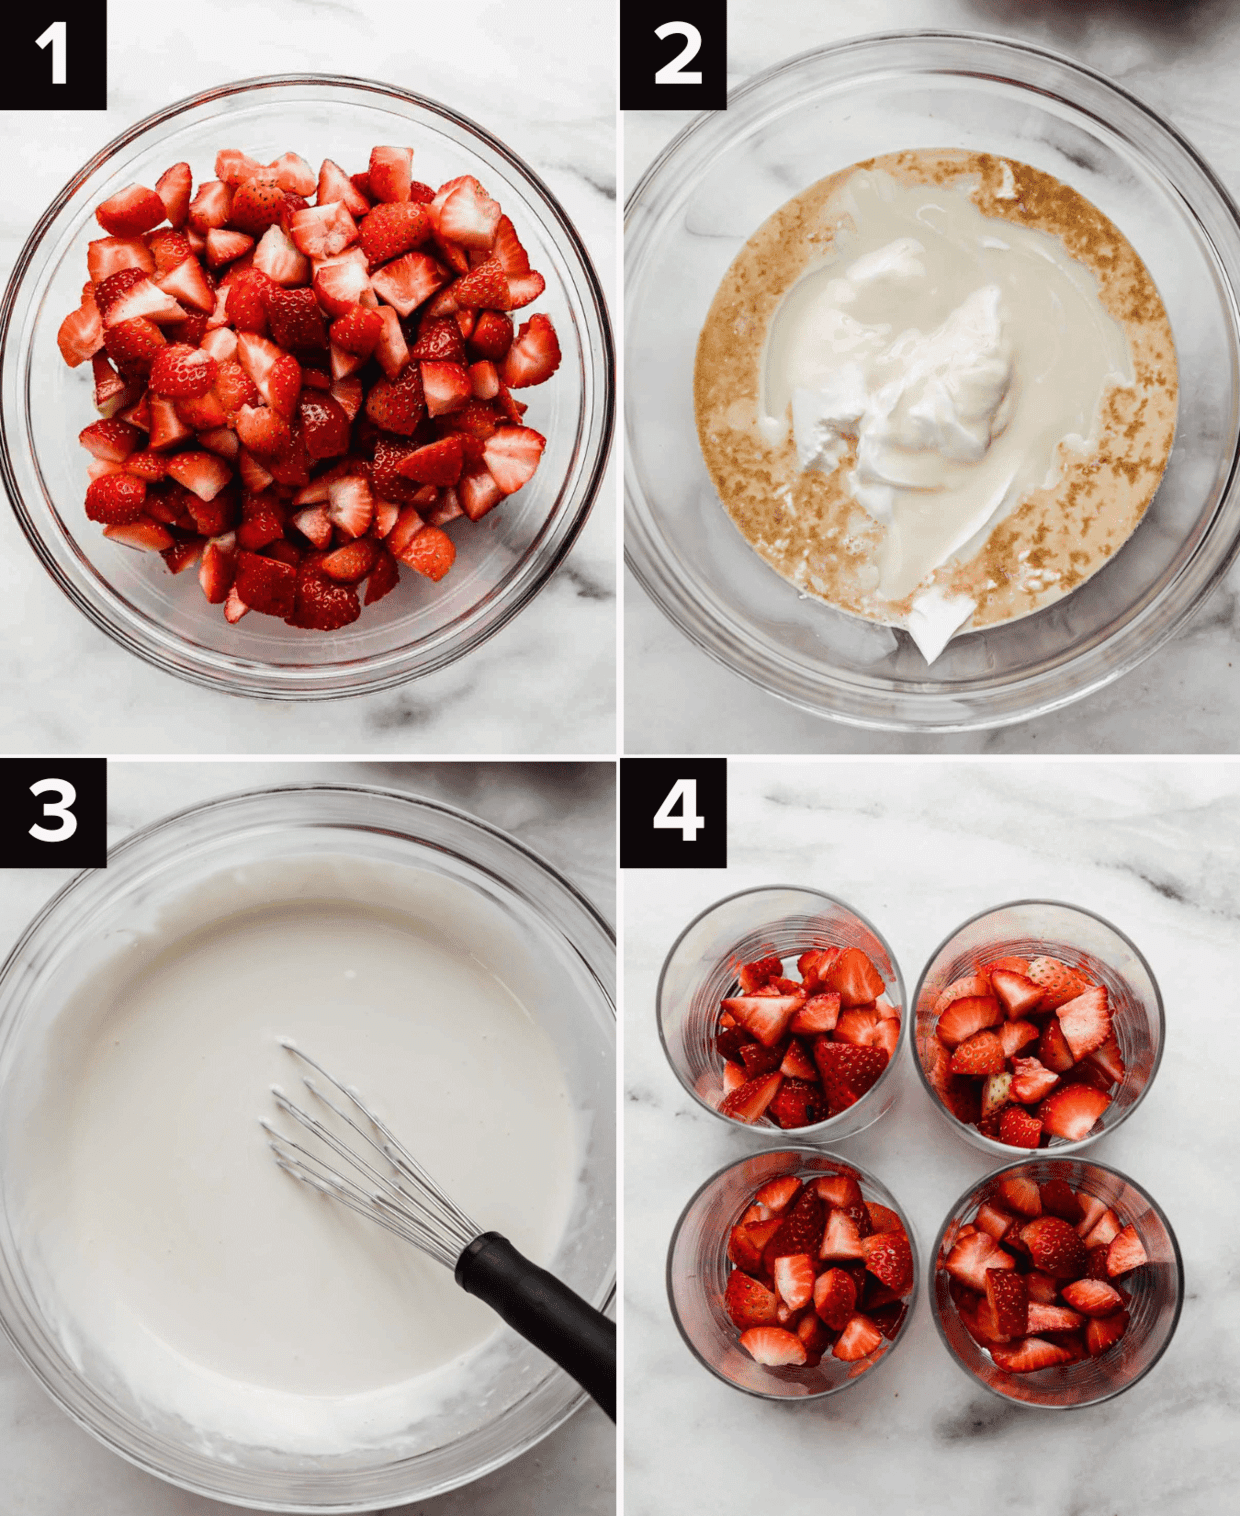 Four images showing the process of making ,Strawberries and Cream (Fresas con Crema), top left is diced strawberries in glass bowl, top right is sour cream, and milks and vanilla in bowl, bottom left is whisk in a white liquid mixture, bottom left is four glass cups filled with chopped strawberries. 